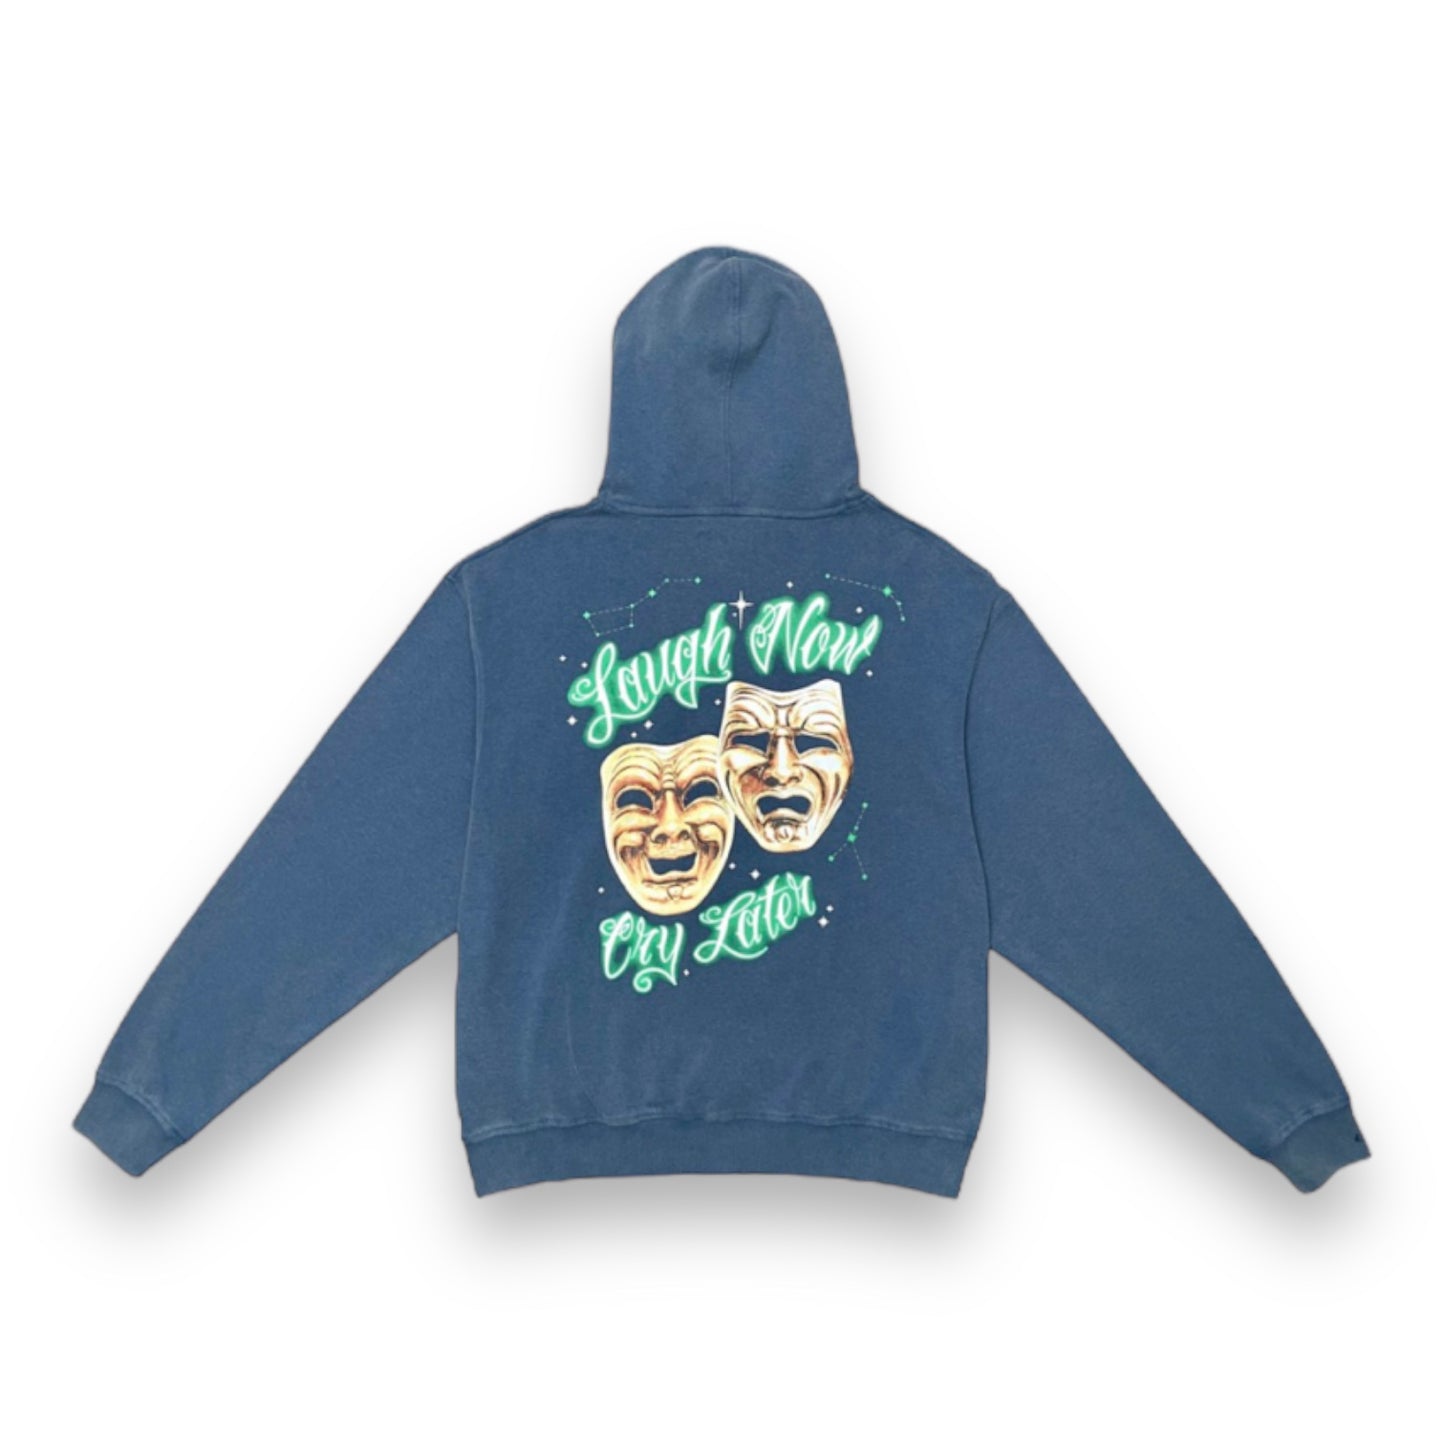 Civilized Laugh Now Hoodie Navy